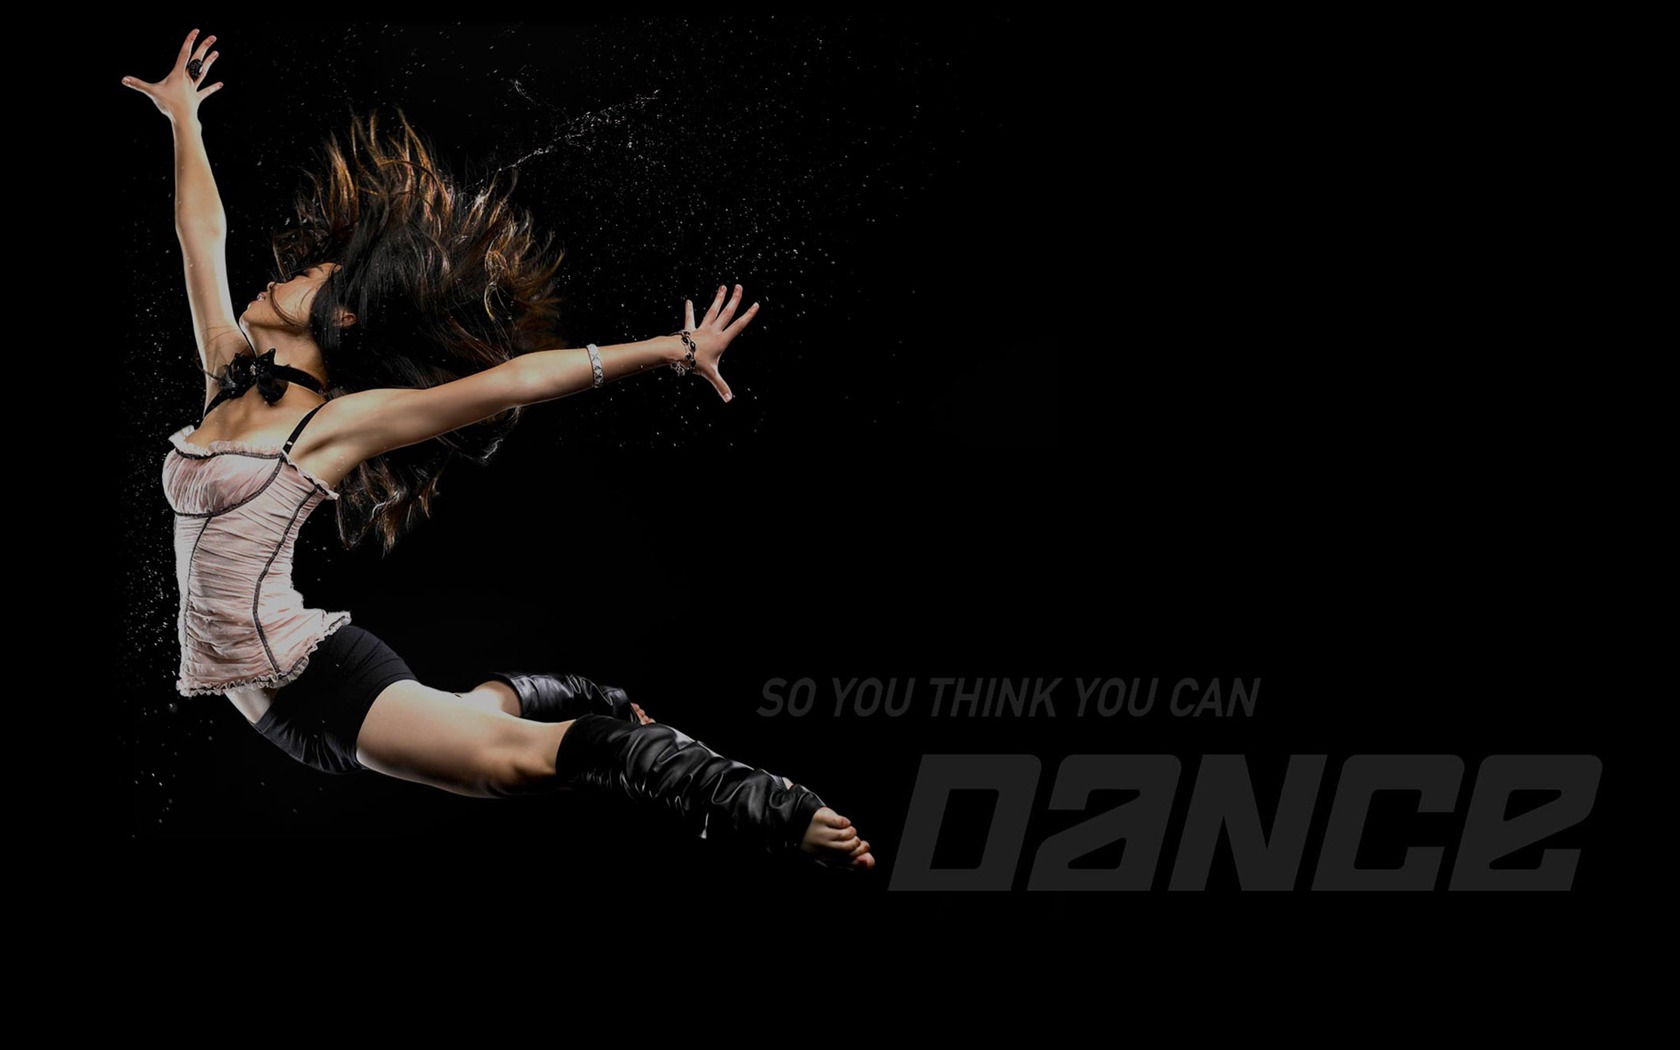 So You Think You Can Dance Wallpaper (1) #1 - 1680x1050